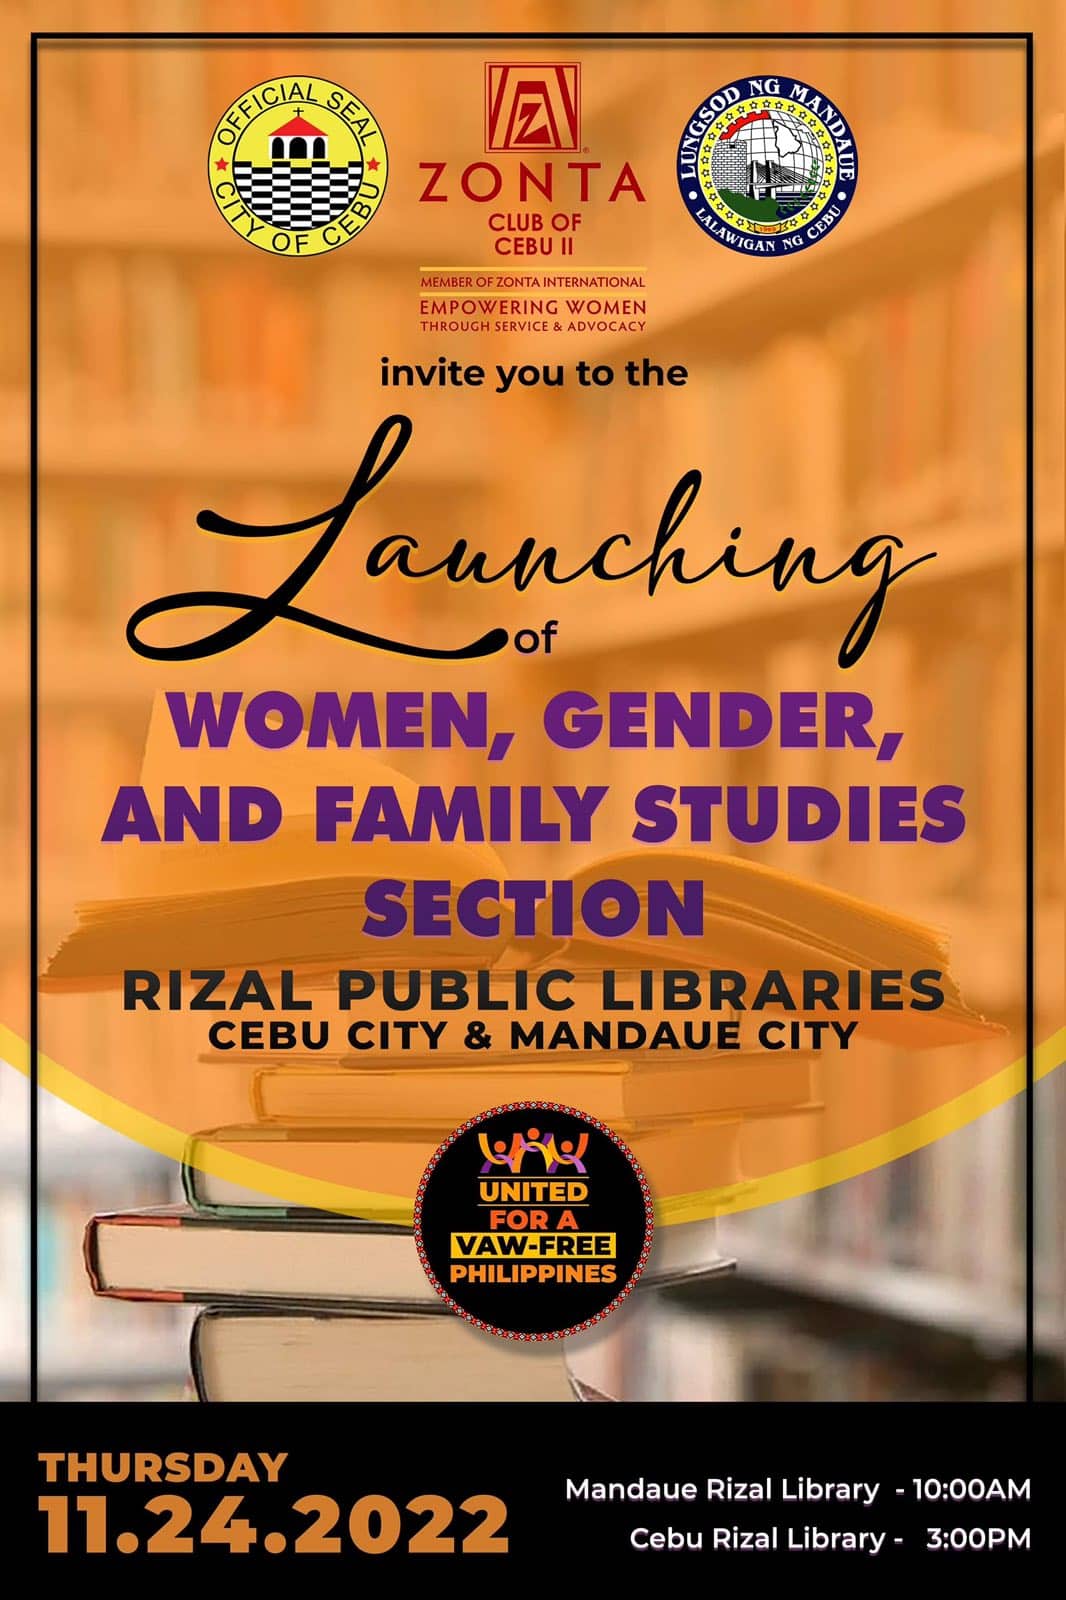 C:\Users\GCPI-ROBBY\Desktop\PRS\PR 1 - ZONTA 18 DAYS OF ACTIVISM\LAUNCHING OF WOMEN GENDER AND FAMILY STUDIES SECTION POSTER.jpg